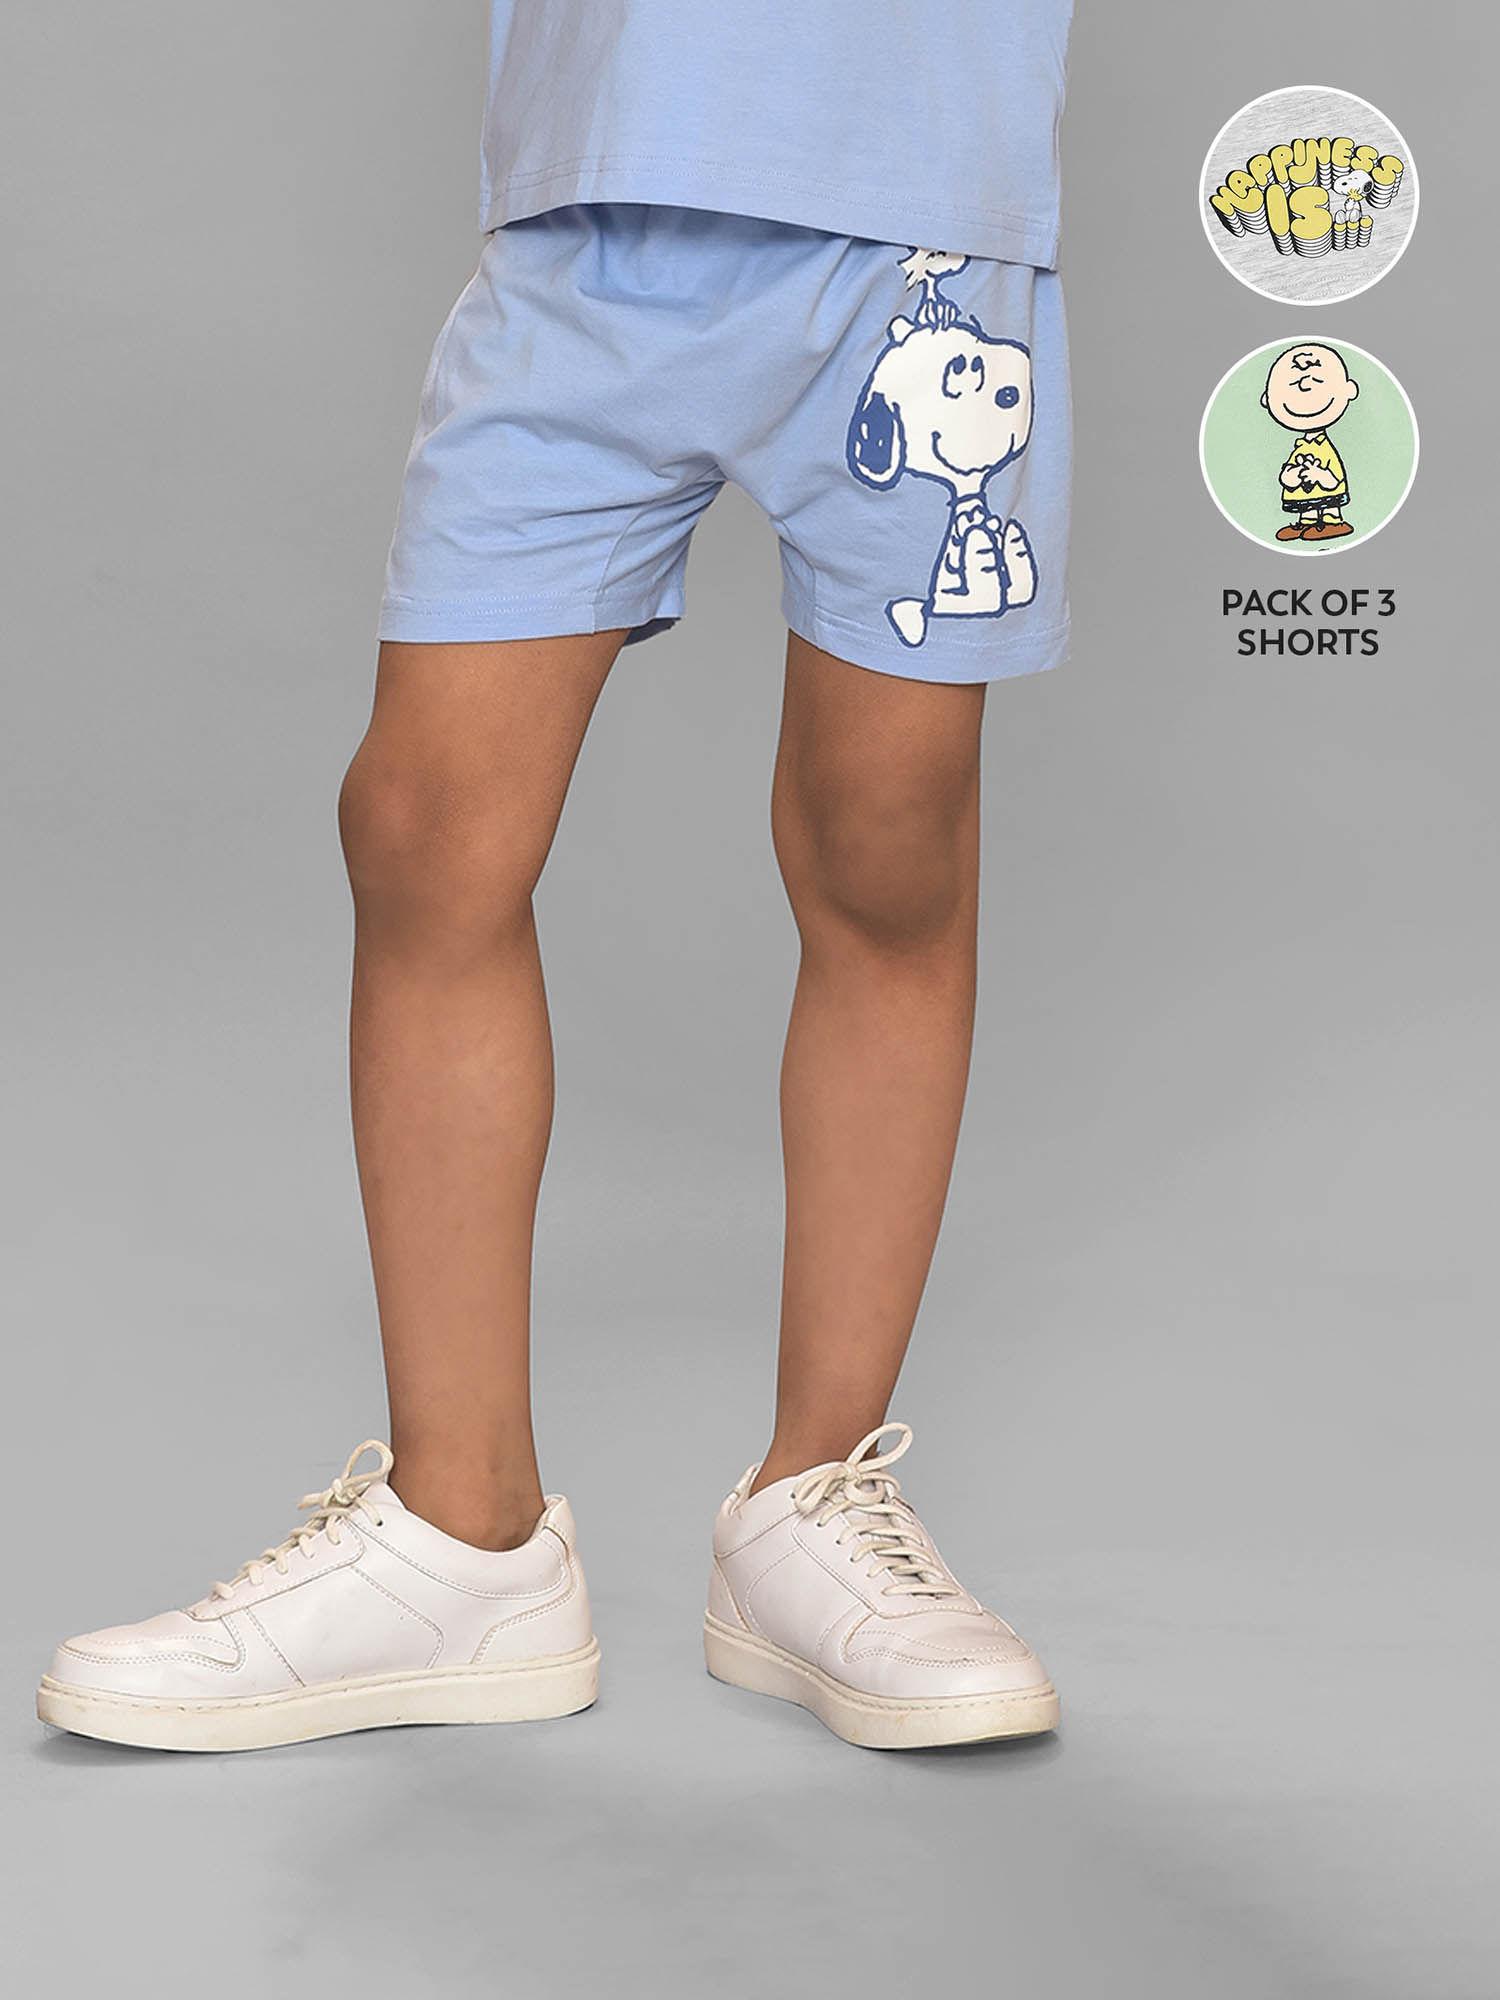 cotton peanuts snoopy printed shorts for kids (pack of 3)